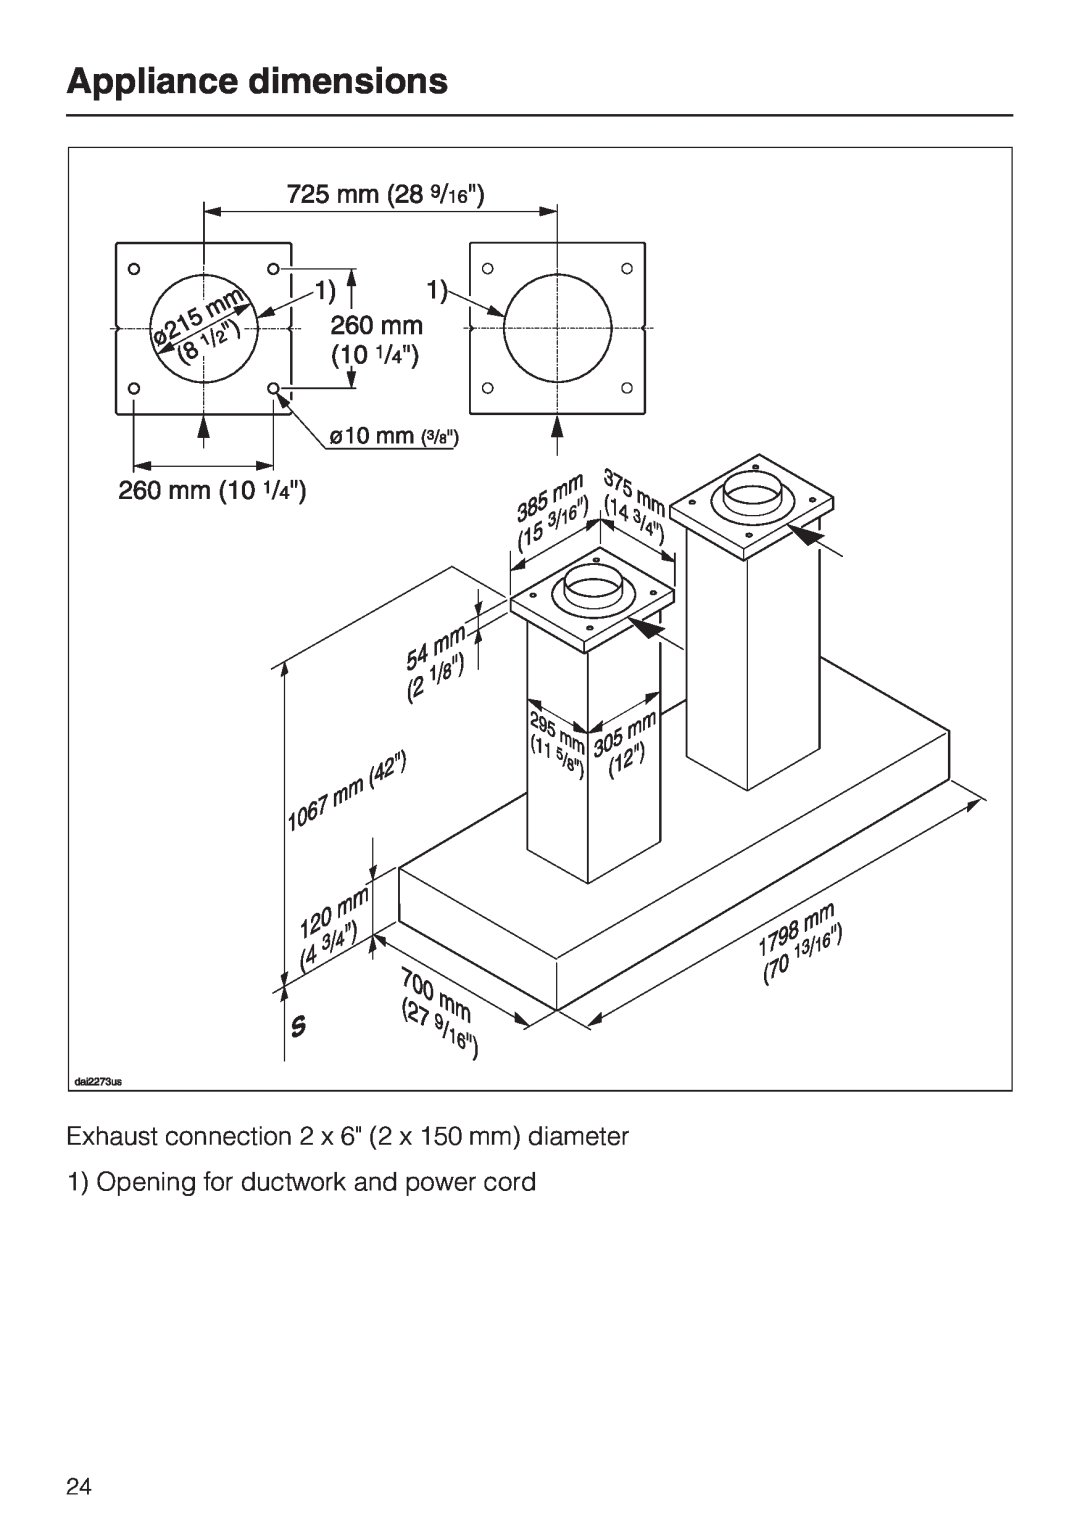 Miele DA5341D Appliance dimensions, Exhaust connection 2 x 6 2 x 150 mm diameter, Opening for ductwork and power cord 